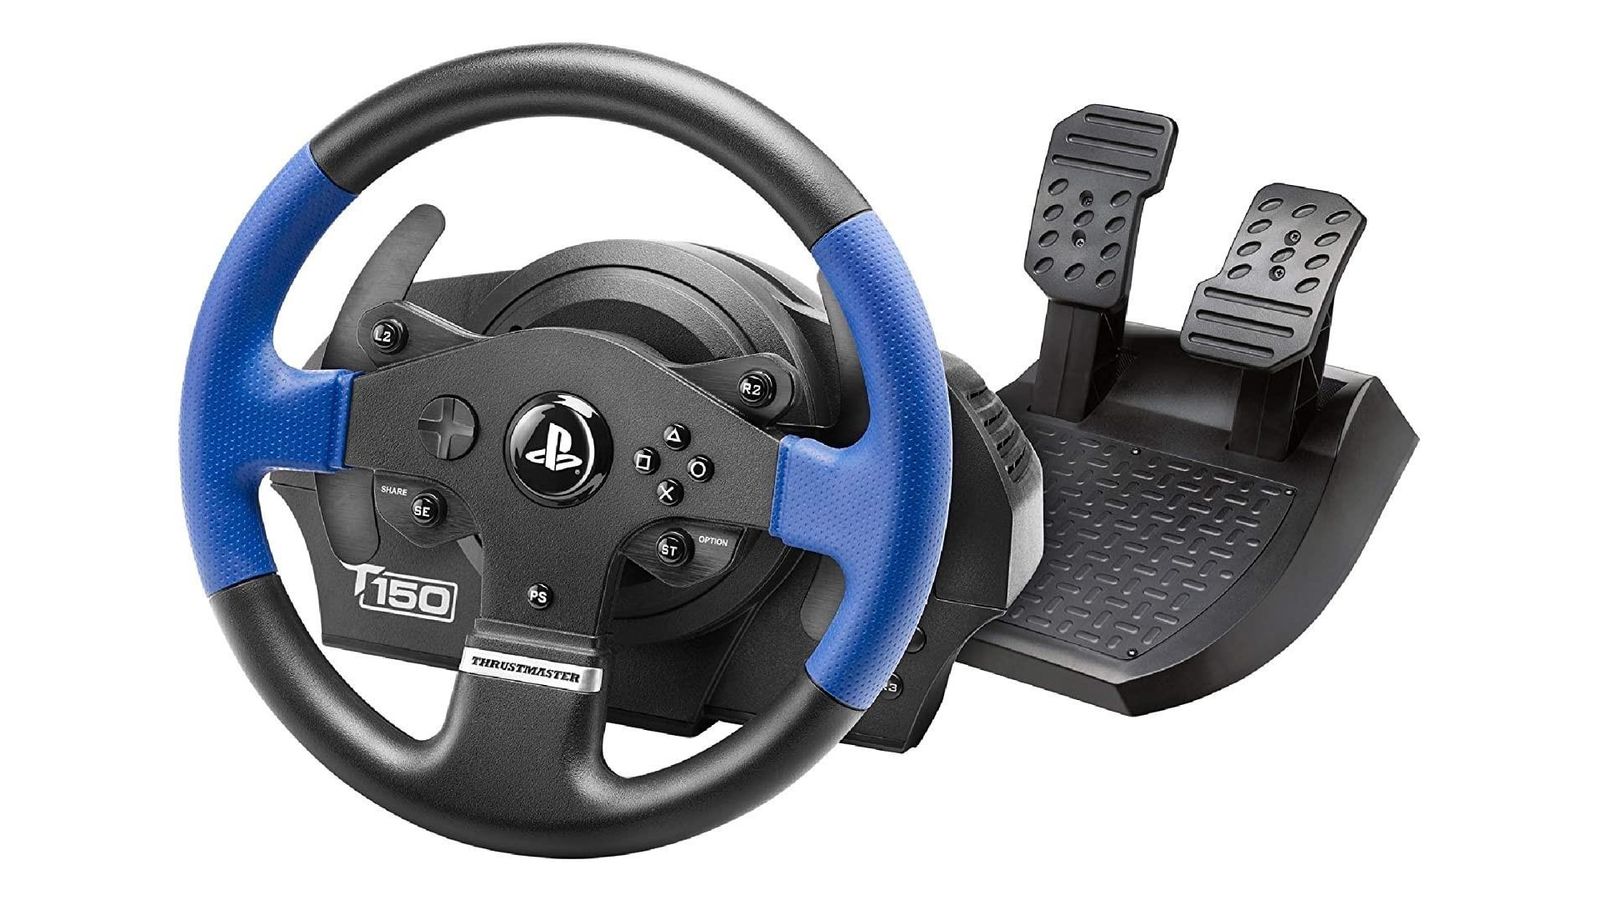 Thrustmaster T150 product image of a black and blue racing wheel next to a set of pedals.